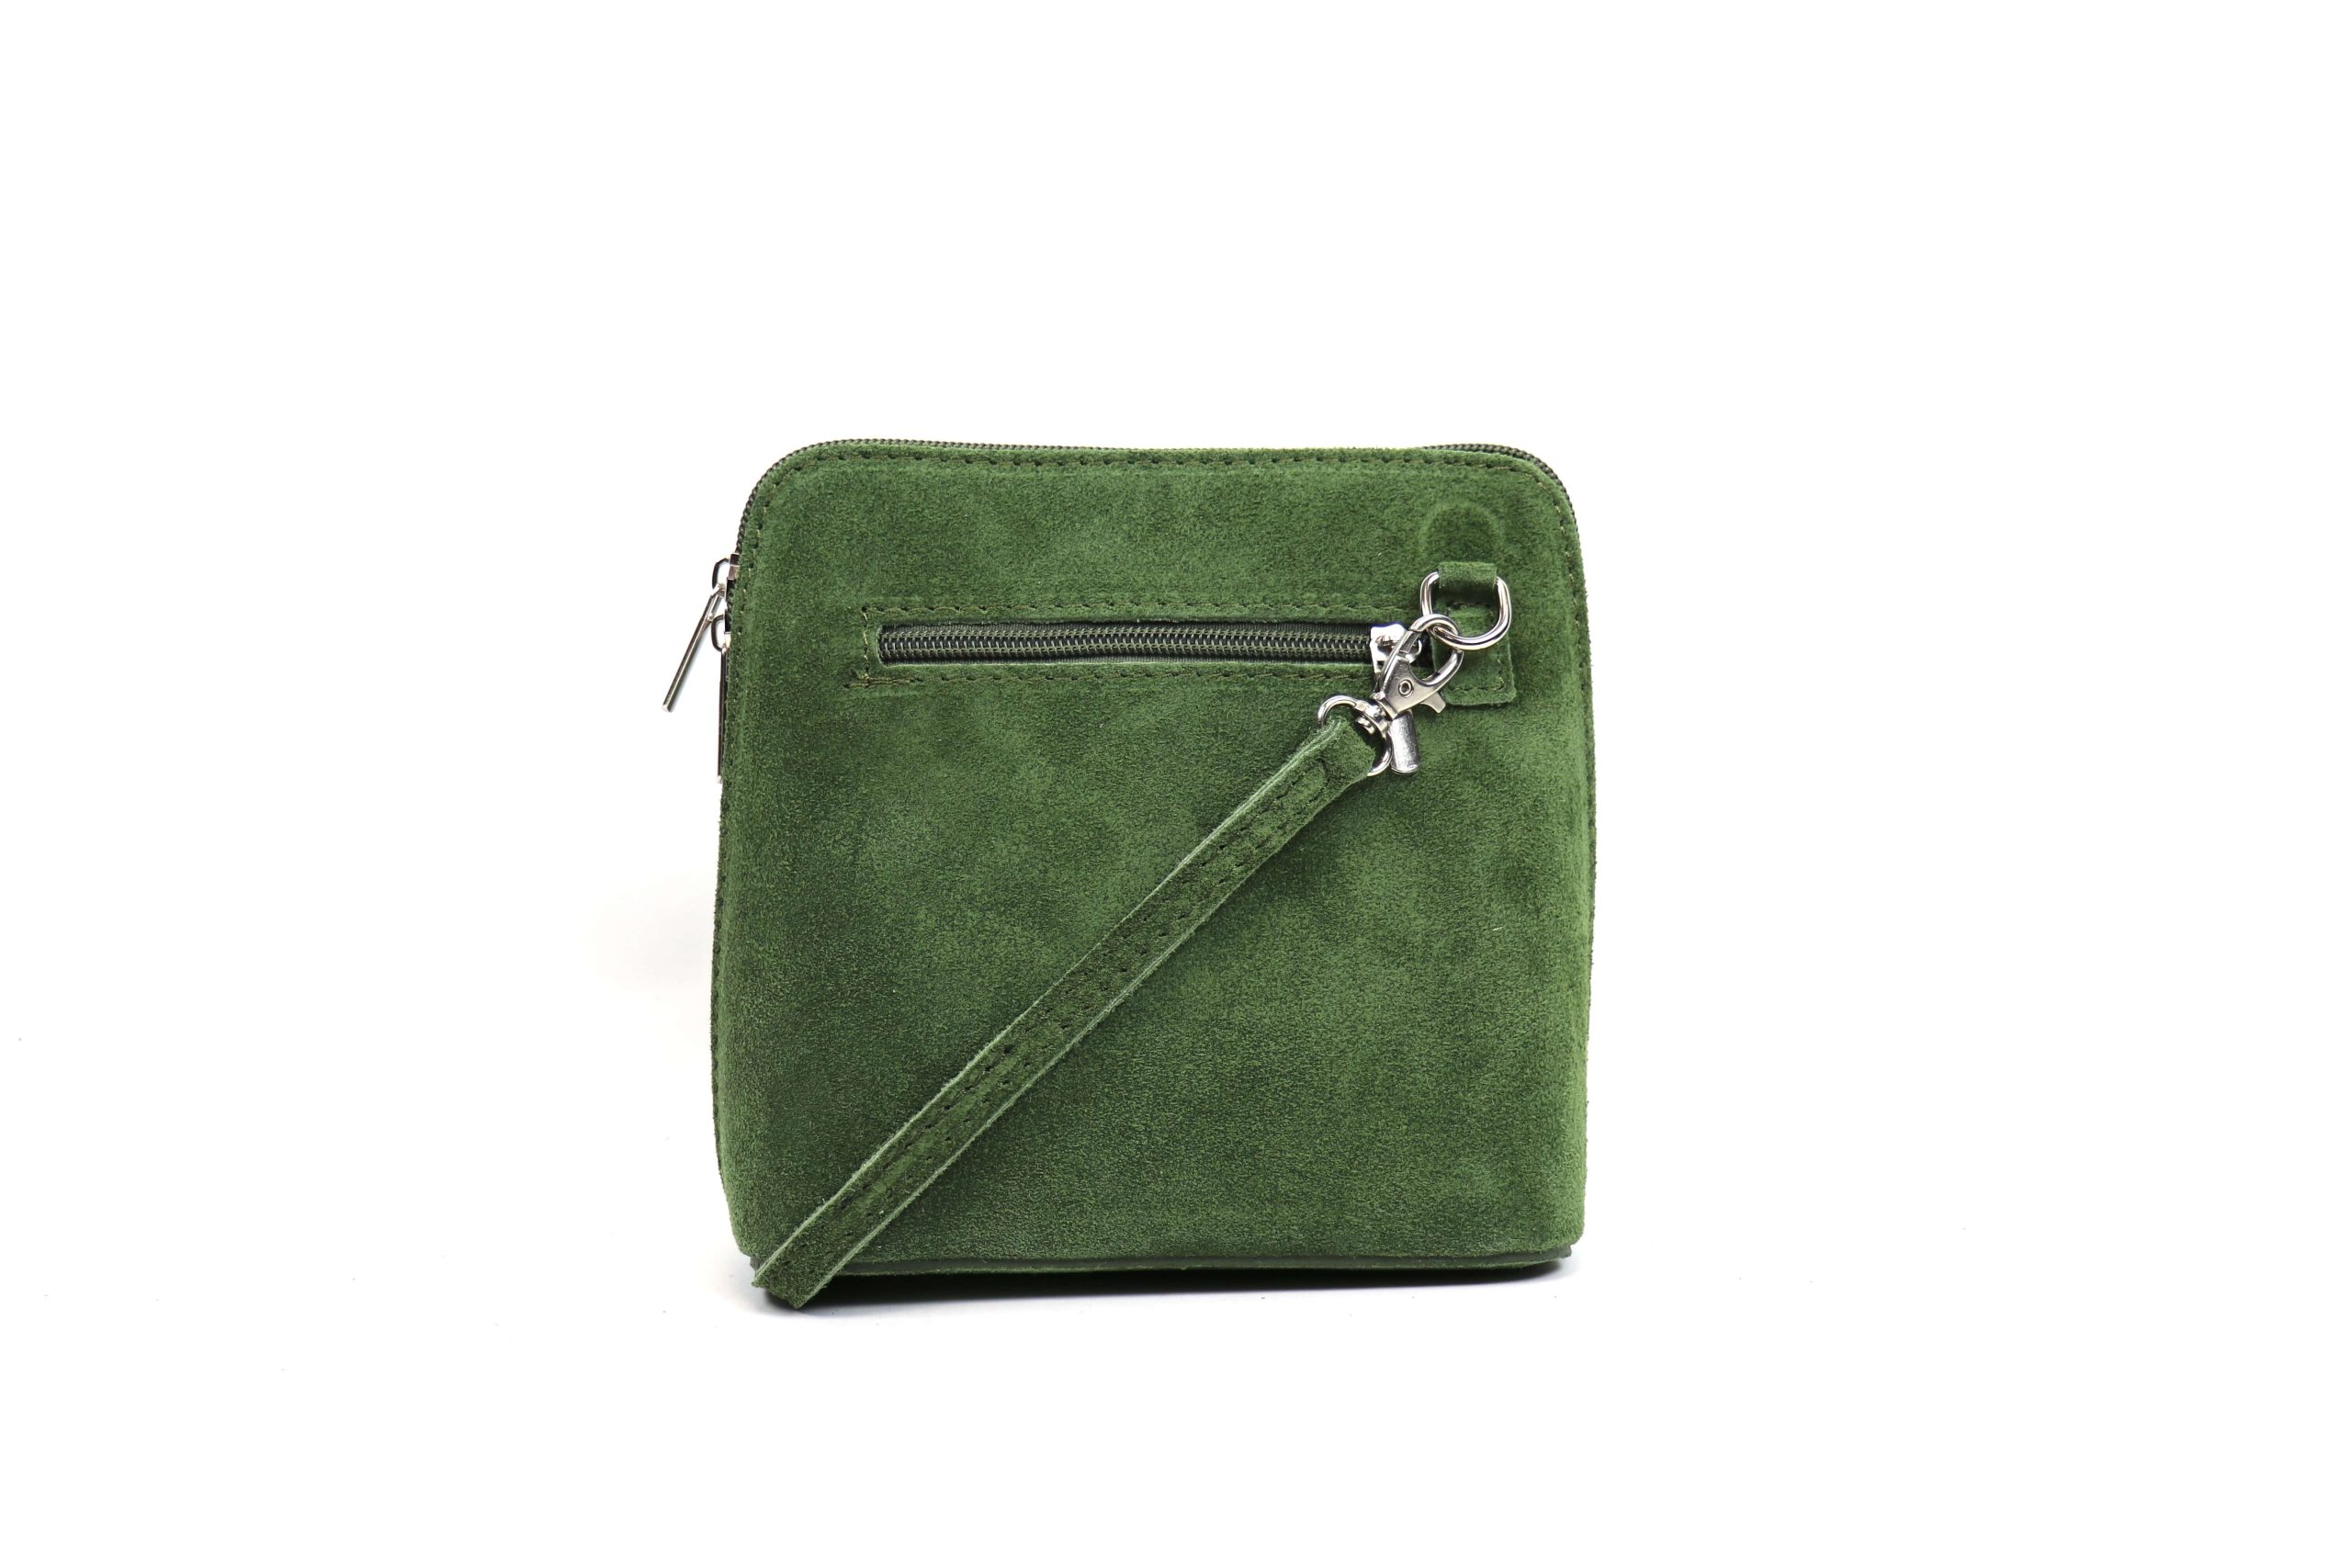 Crossbody Purses and Bags | Hyer Goods